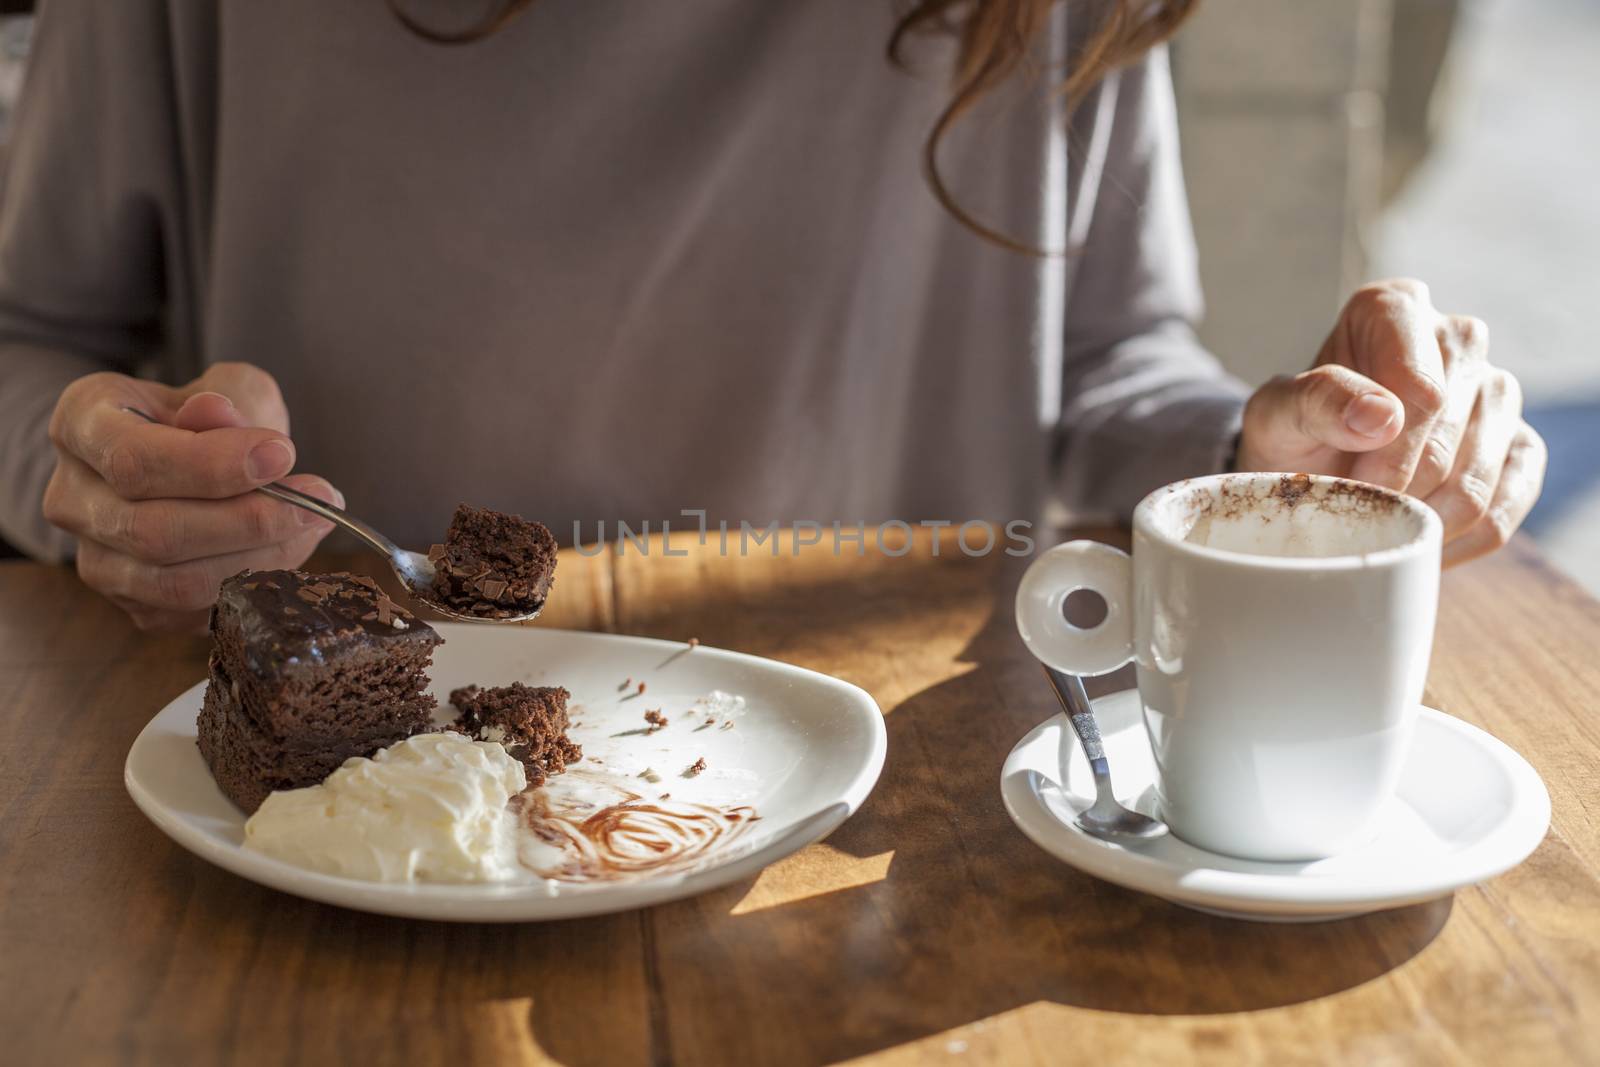 woman hands taking chocolate cake piece with spoon and white small cup cappuccino coffee on light brown wooden table